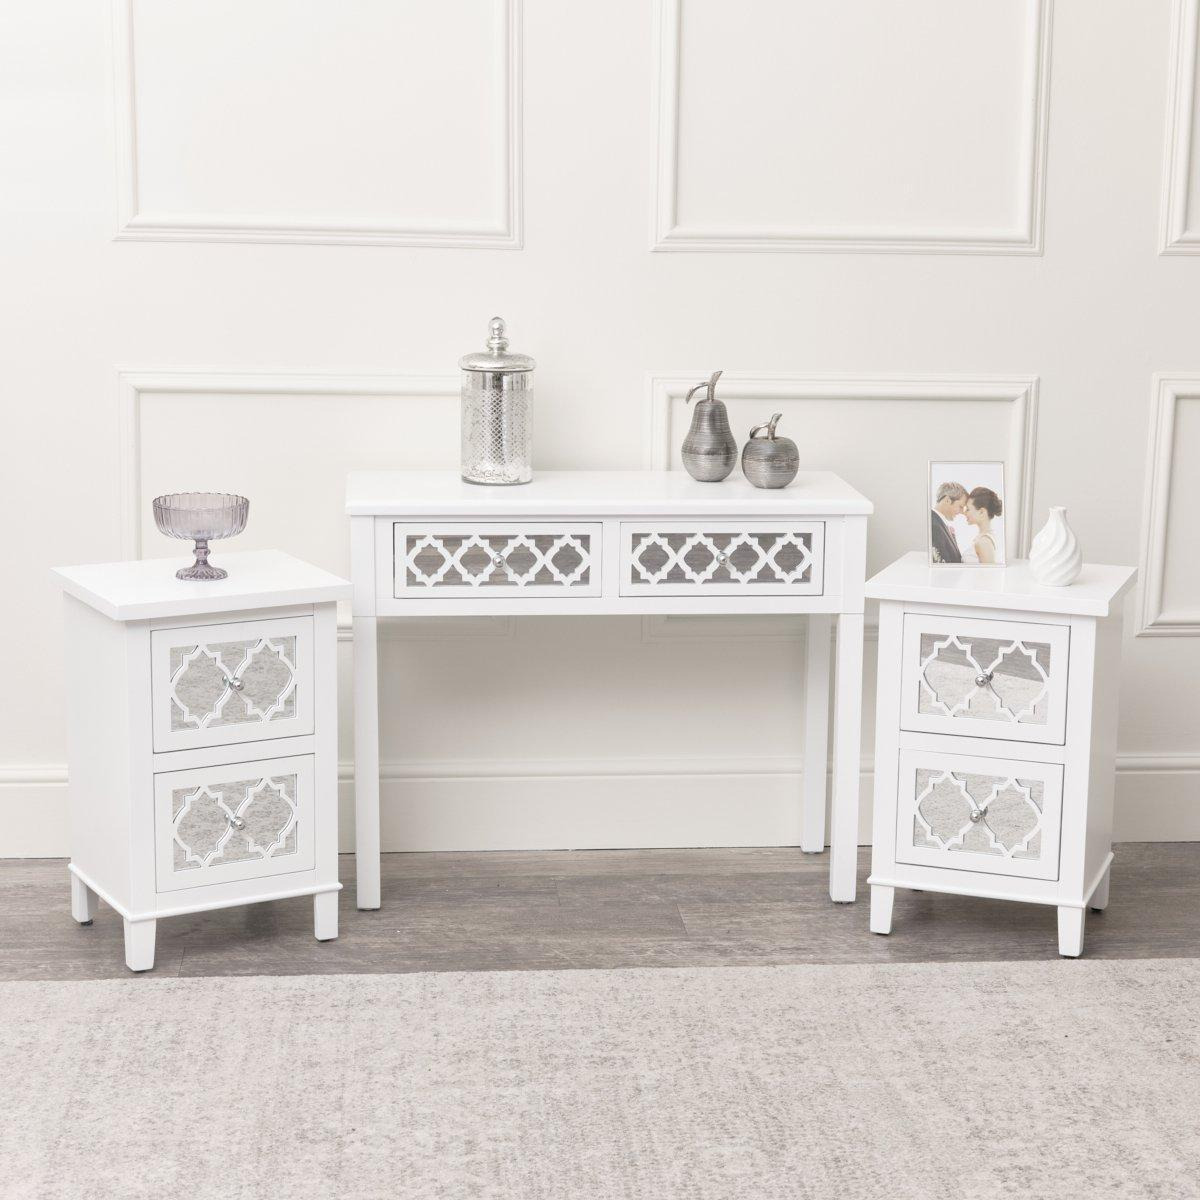 White Mirrored Console Table / Dressing Table & Pair Of White Mirrored Bedside Tables - Sabrina White Range - image 1